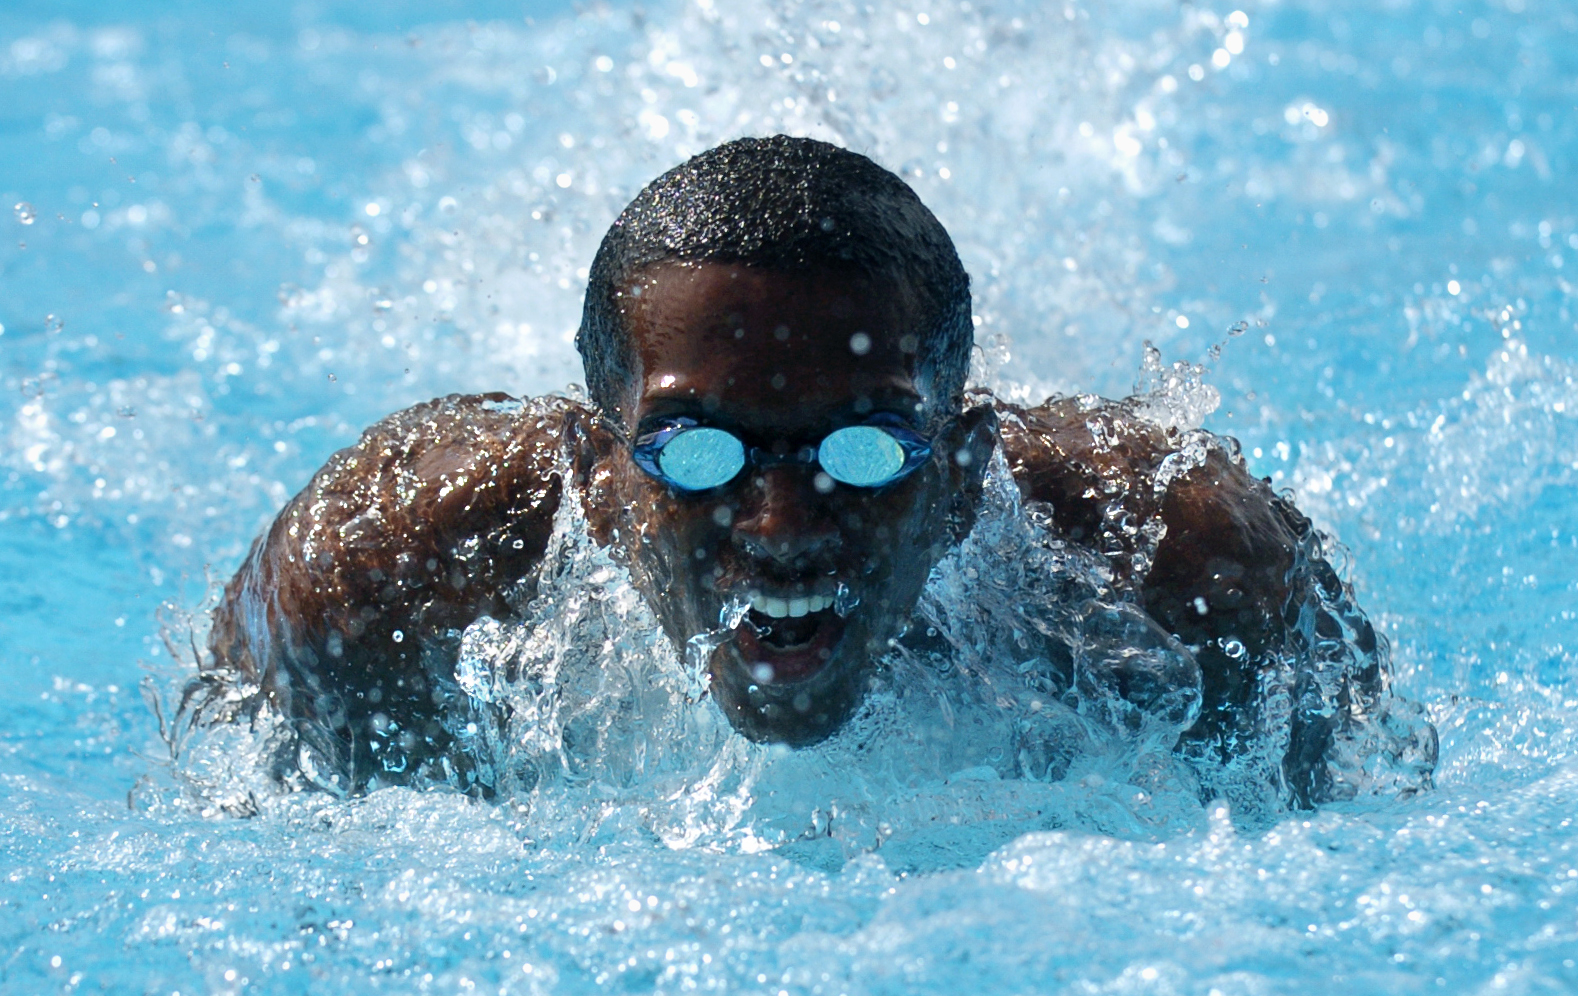 Mark Cox of Venice High competes in a 100-yard butterfly preliminary heat at the Masters Tri-County swim meet Saturday, September 27, 2008 at the Selby Aquatic Center in Sarasota.